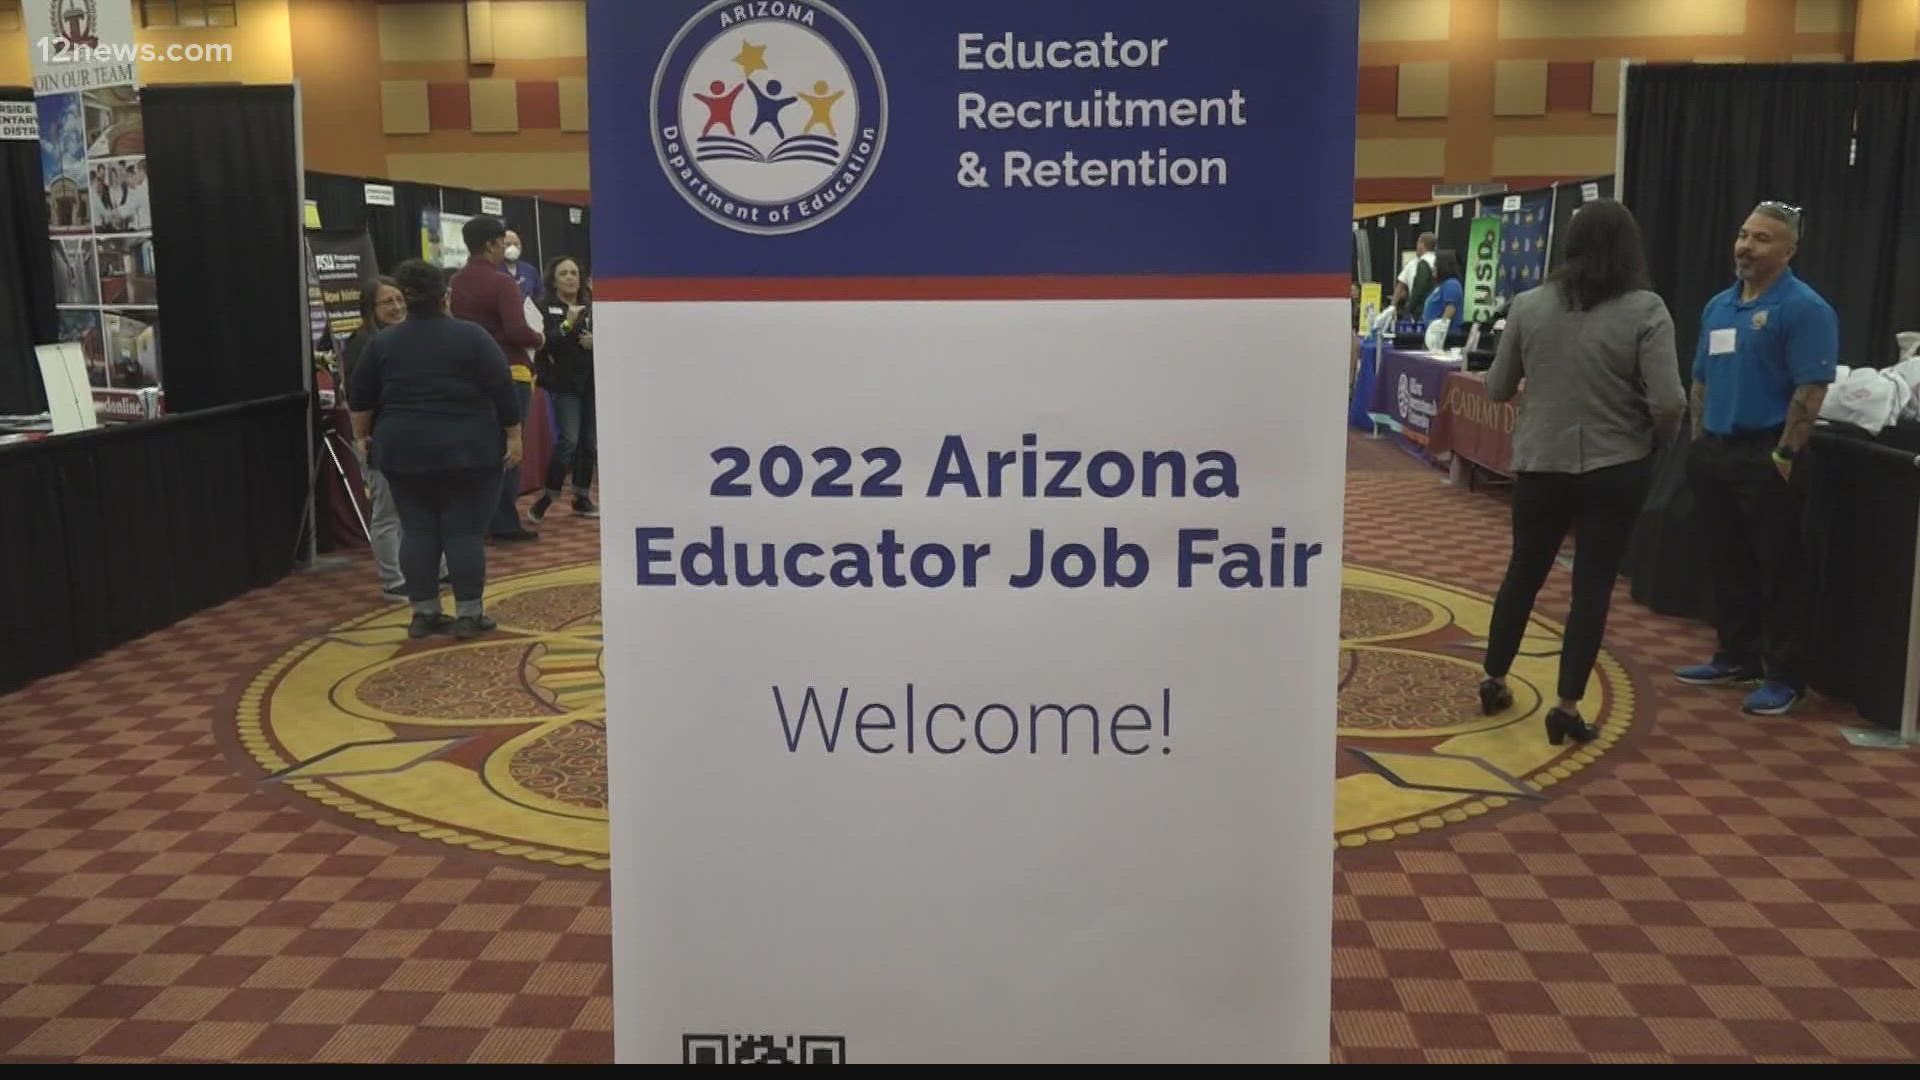 State Superintendent Kathy Hoffman attended the 2022 Arizona Educator Job Fair on Saturday morning hosted by the Arizona Department of Education.